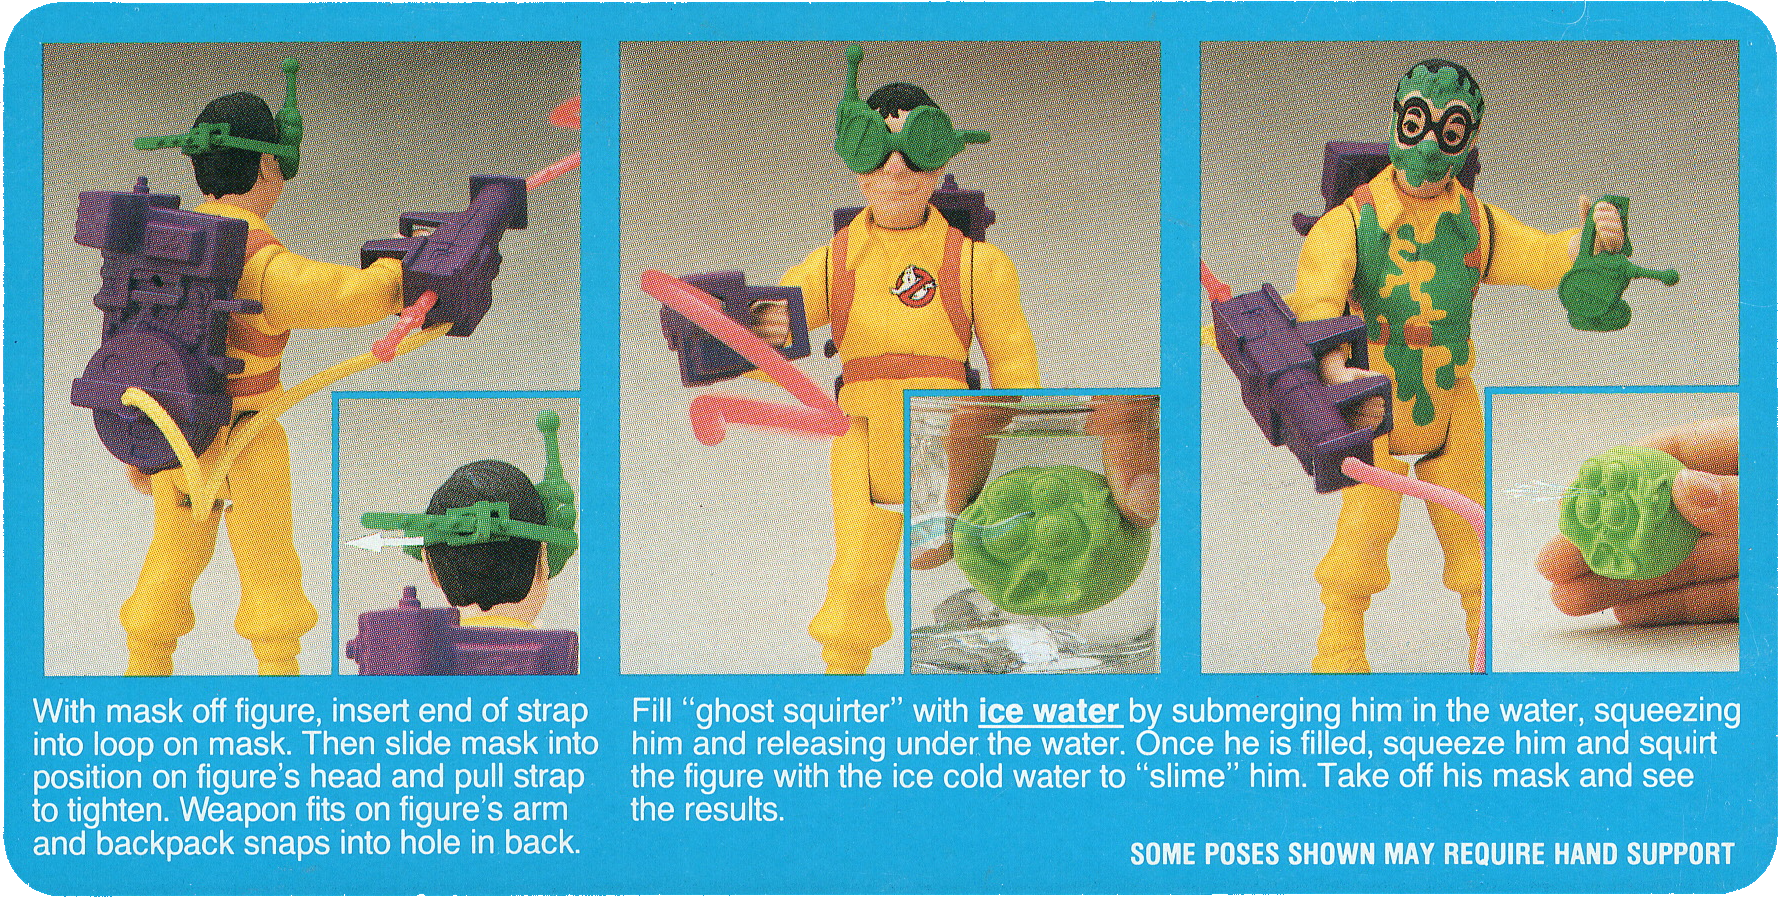 Louis Tully - Slimed Heroes - Kenner - The Real Ghostbusters action figure